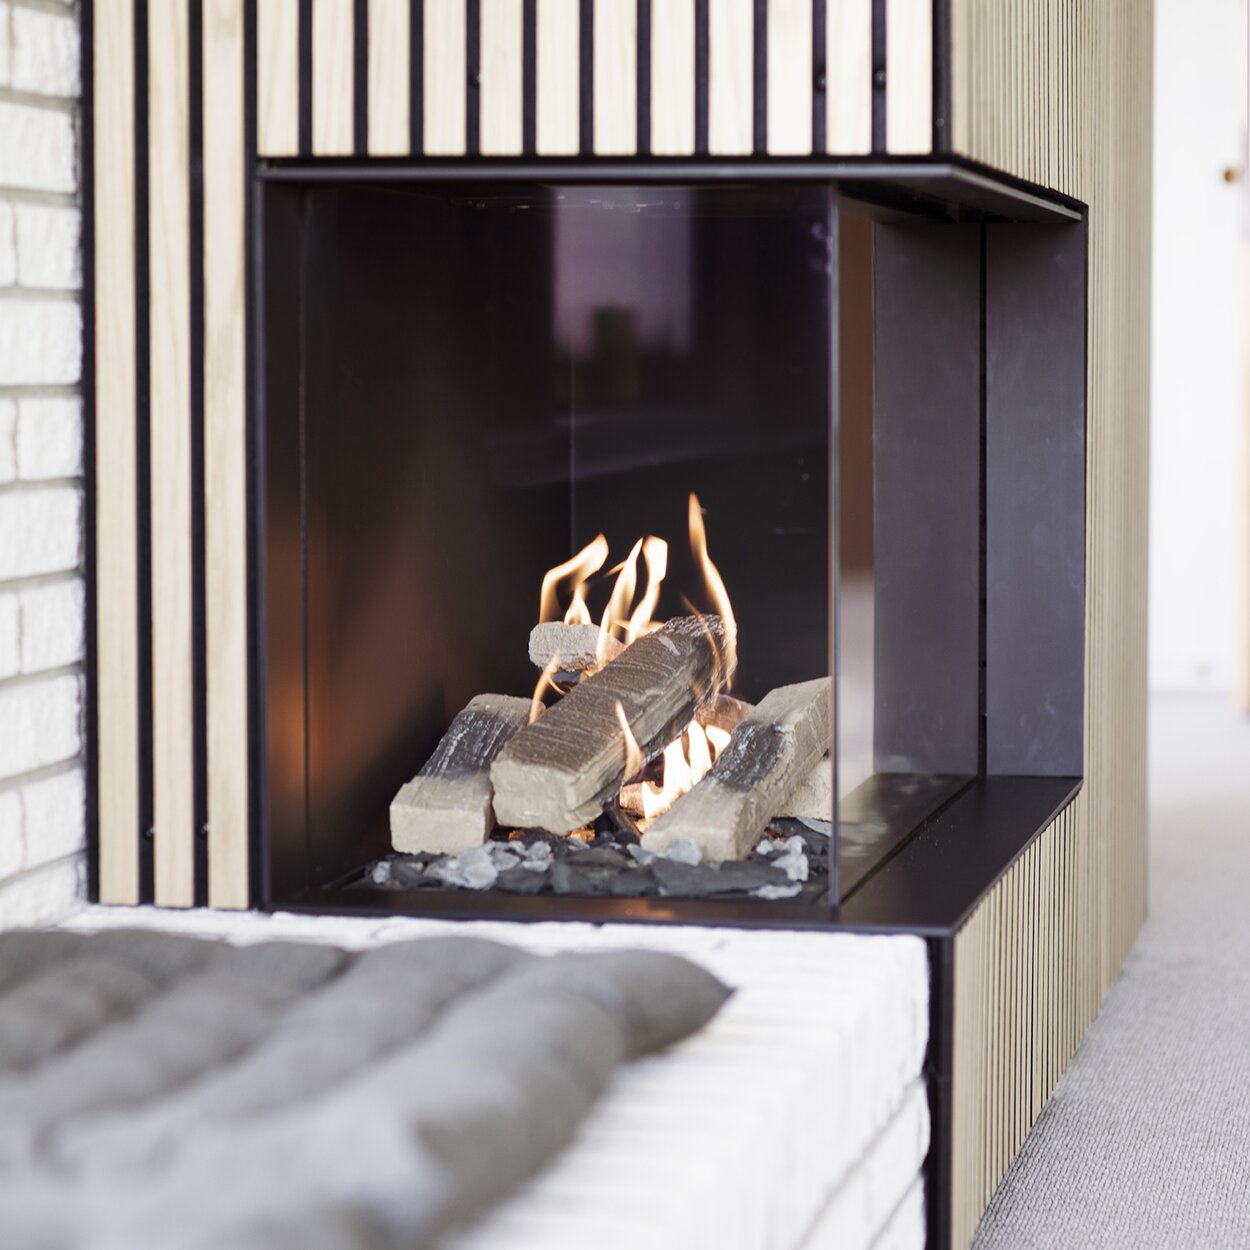 VISIO 70 RC gas fireplace with high-quality artificial logs made of ceramic